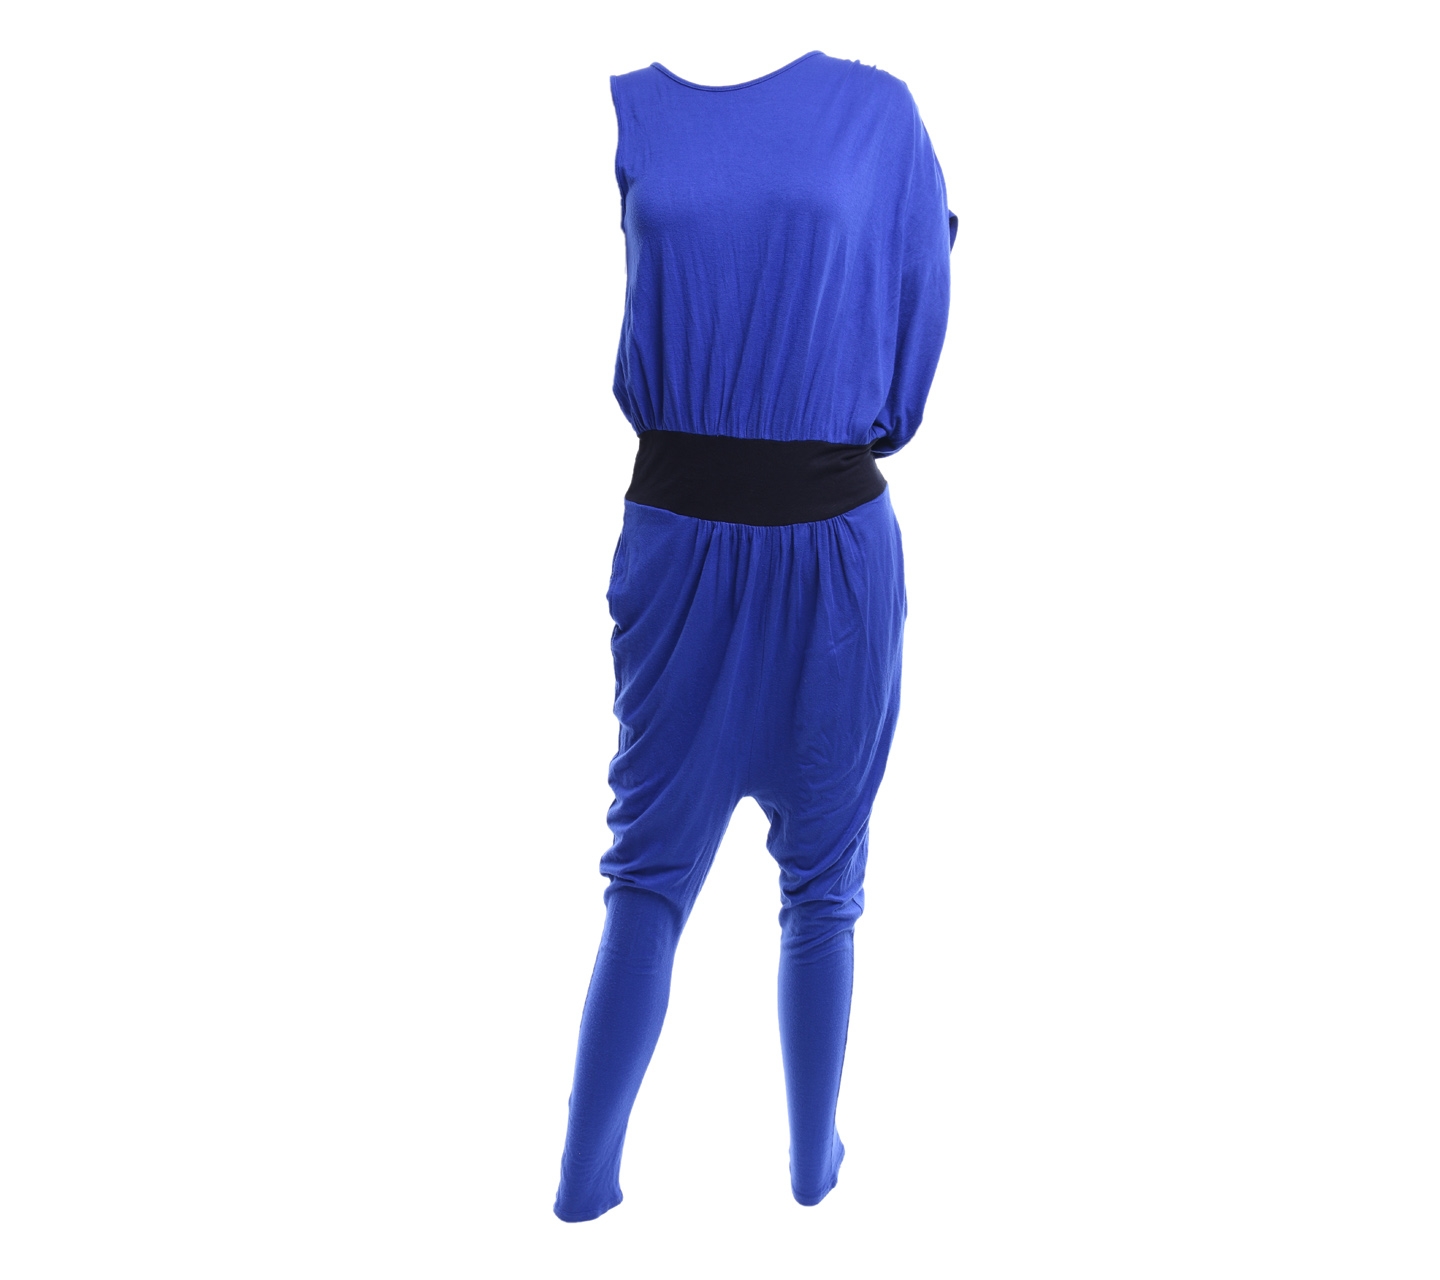 J.REP Blue One Bad WIng Sleeveless Jumpsuit